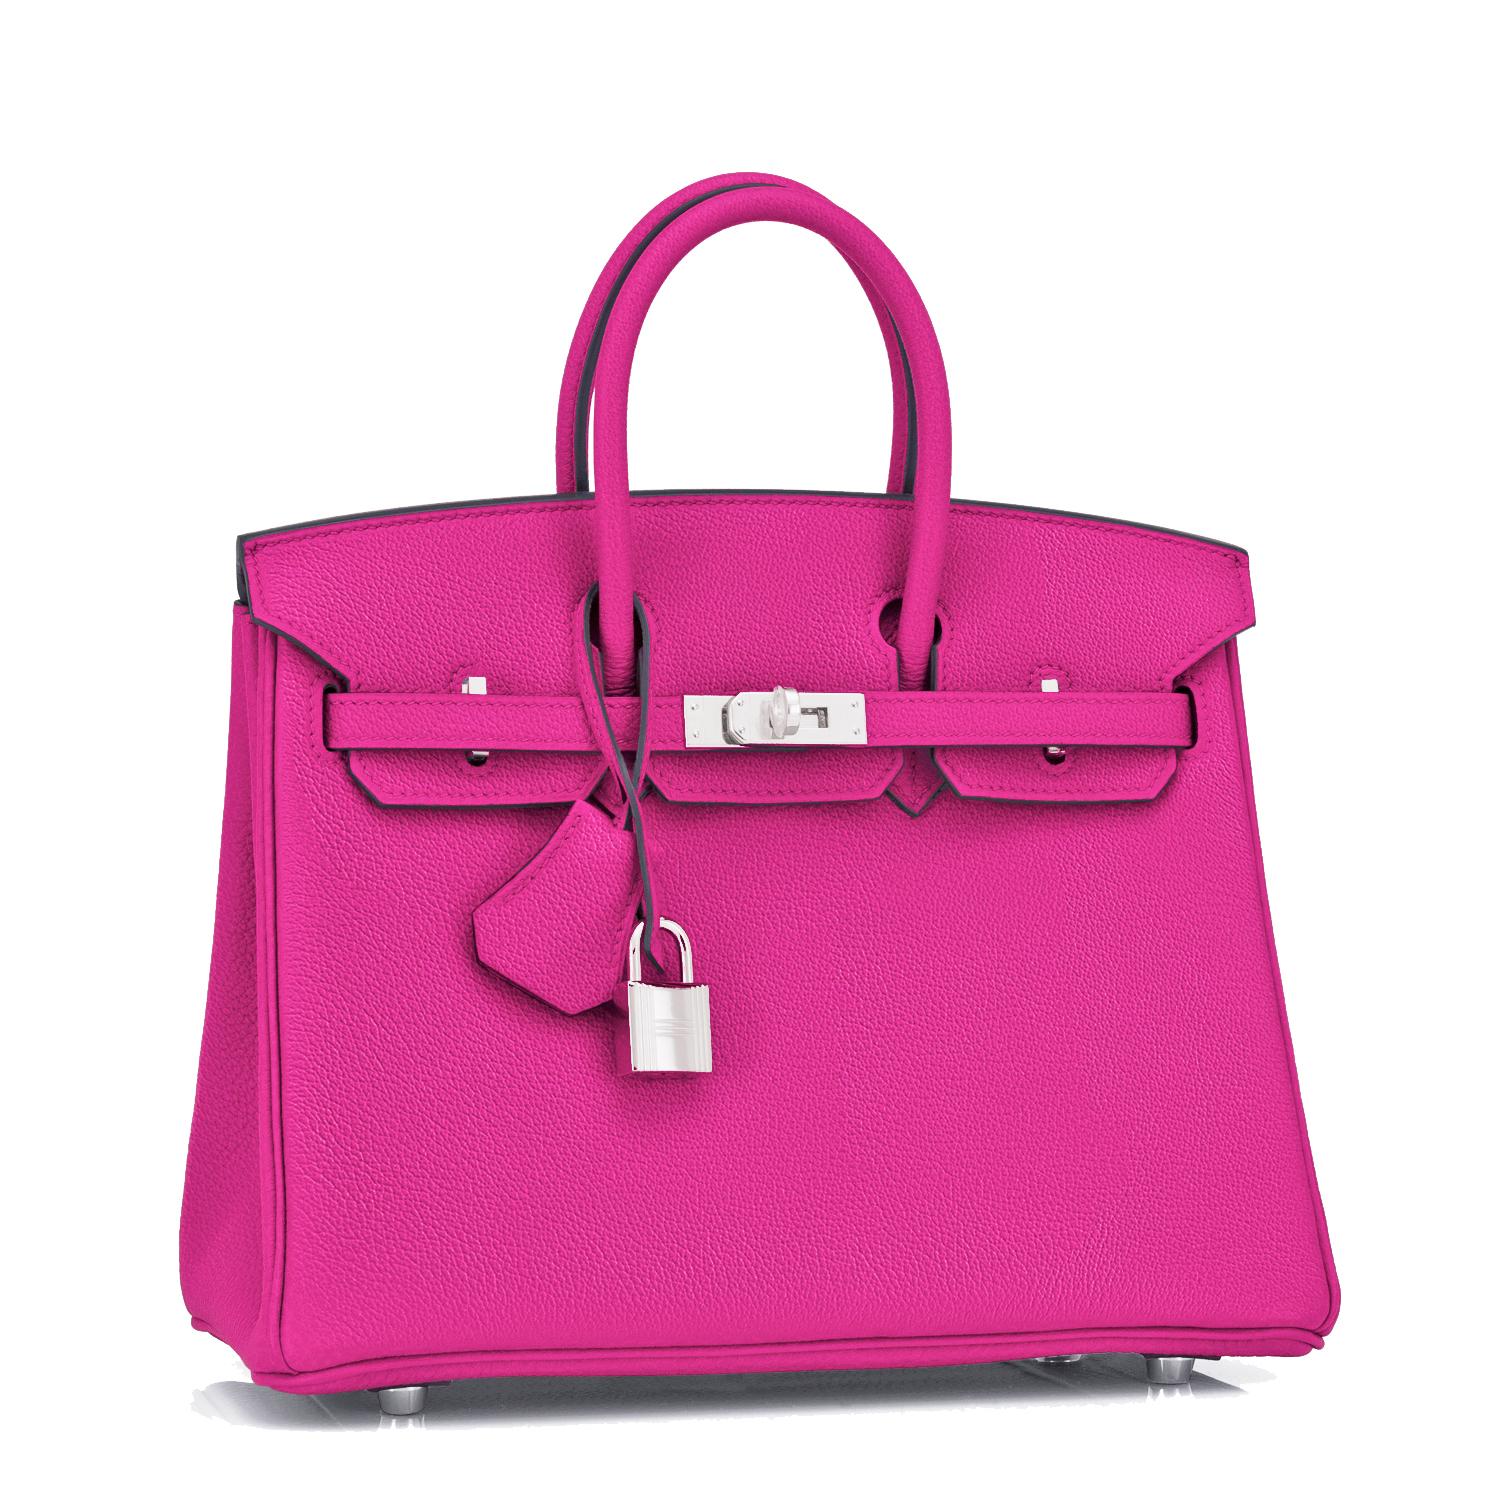 Hermes Birkin 25 Magnolia Capucine Jewel Pink Red Orange Verso Bag Z Stamp, 2021
Limited Edition Bi-Color Verso Birkin in magnificent Magnolia and gorgeous Capucine!
Just purchased from Hermes store! Bag bears new 2021 interior Z Stamp.
Brand New in